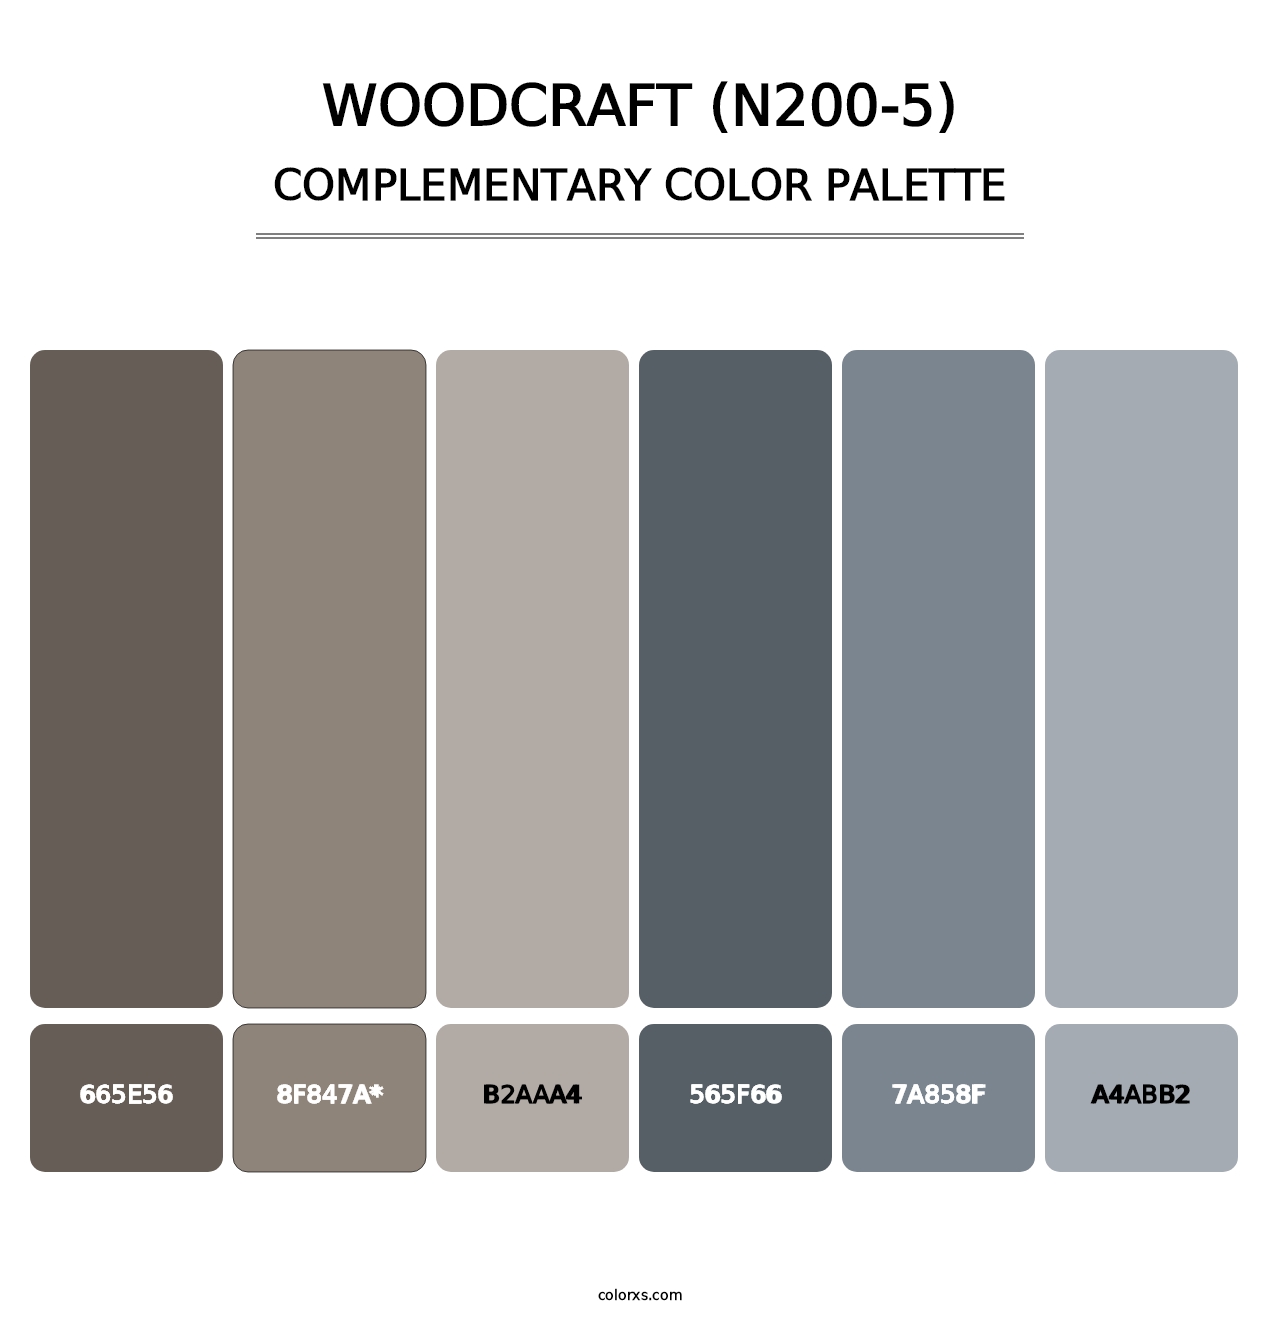 Woodcraft (N200-5) - Complementary Color Palette